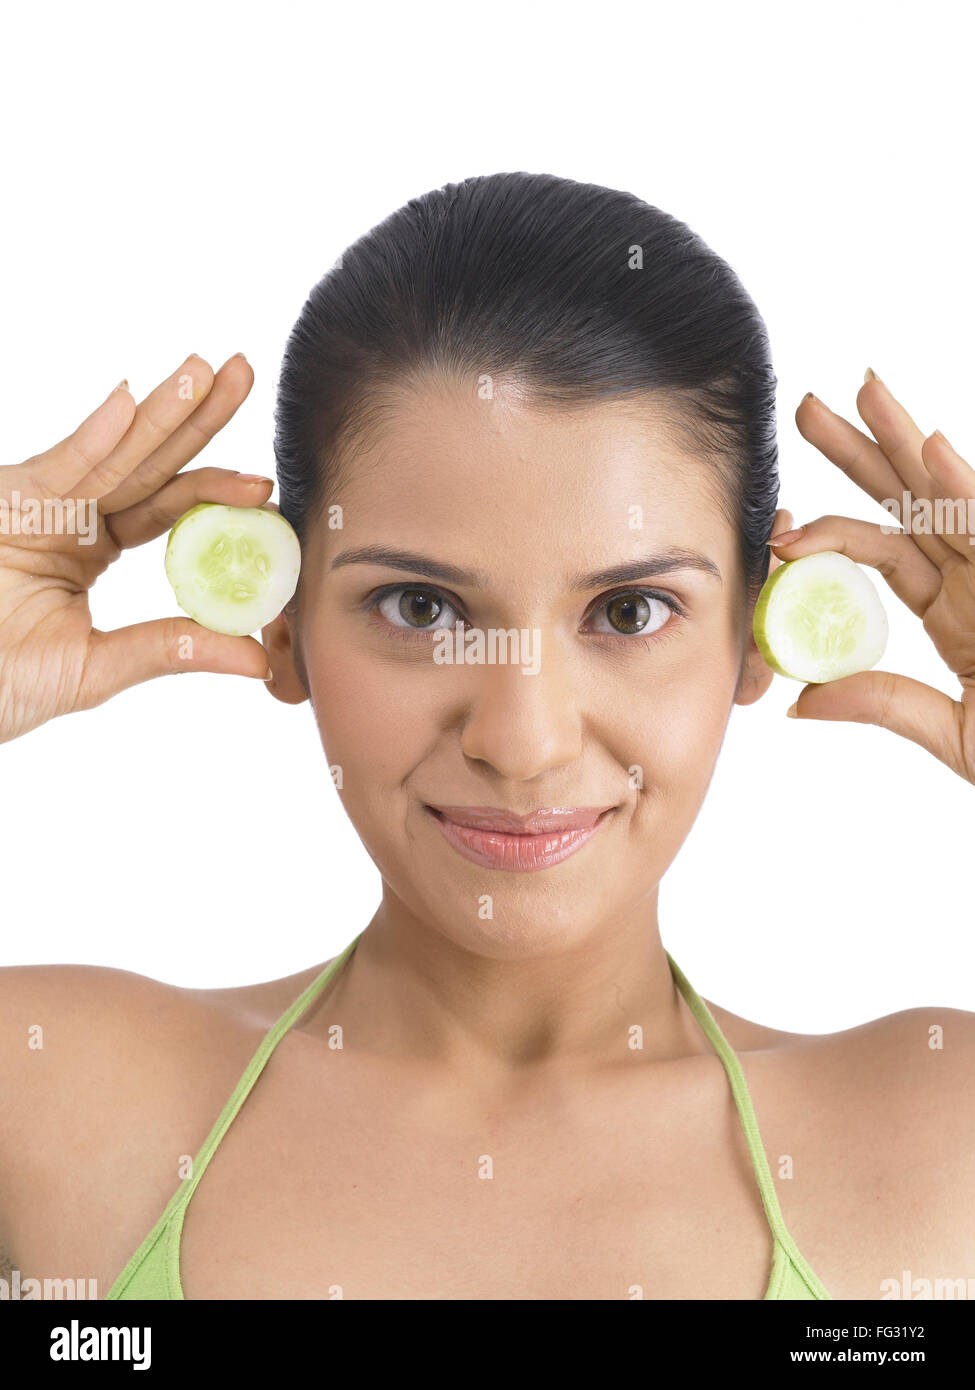 South Asian Indian woman holding and showing cucumber wearing green dress MR # 702 Stock Photo